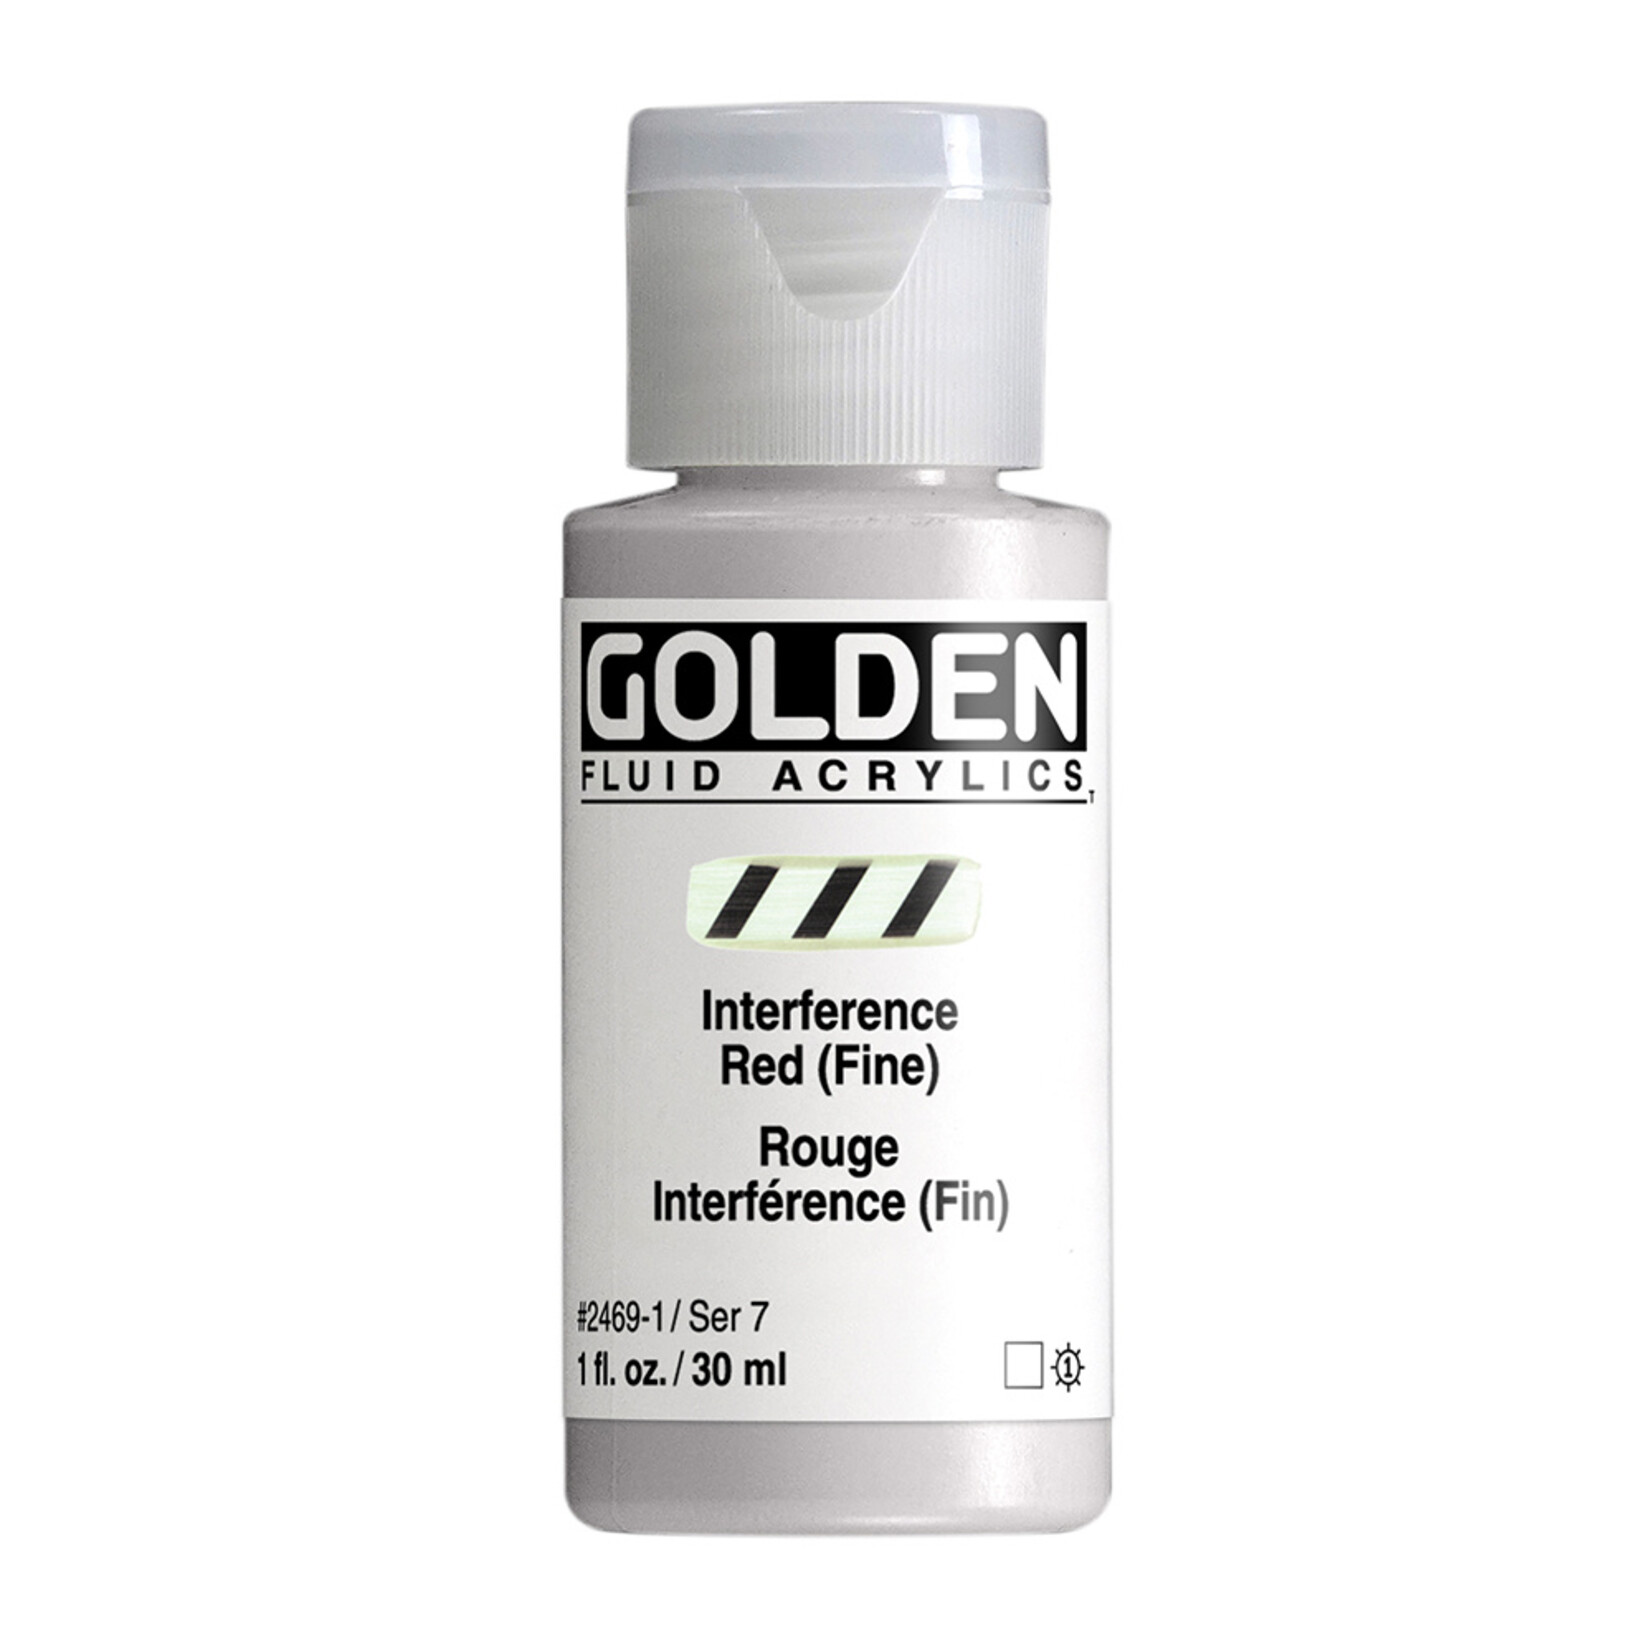 GOLDEN GOLDEN FLUID ACRYLIC 1OZ INTERFERENCE RED (FINE)